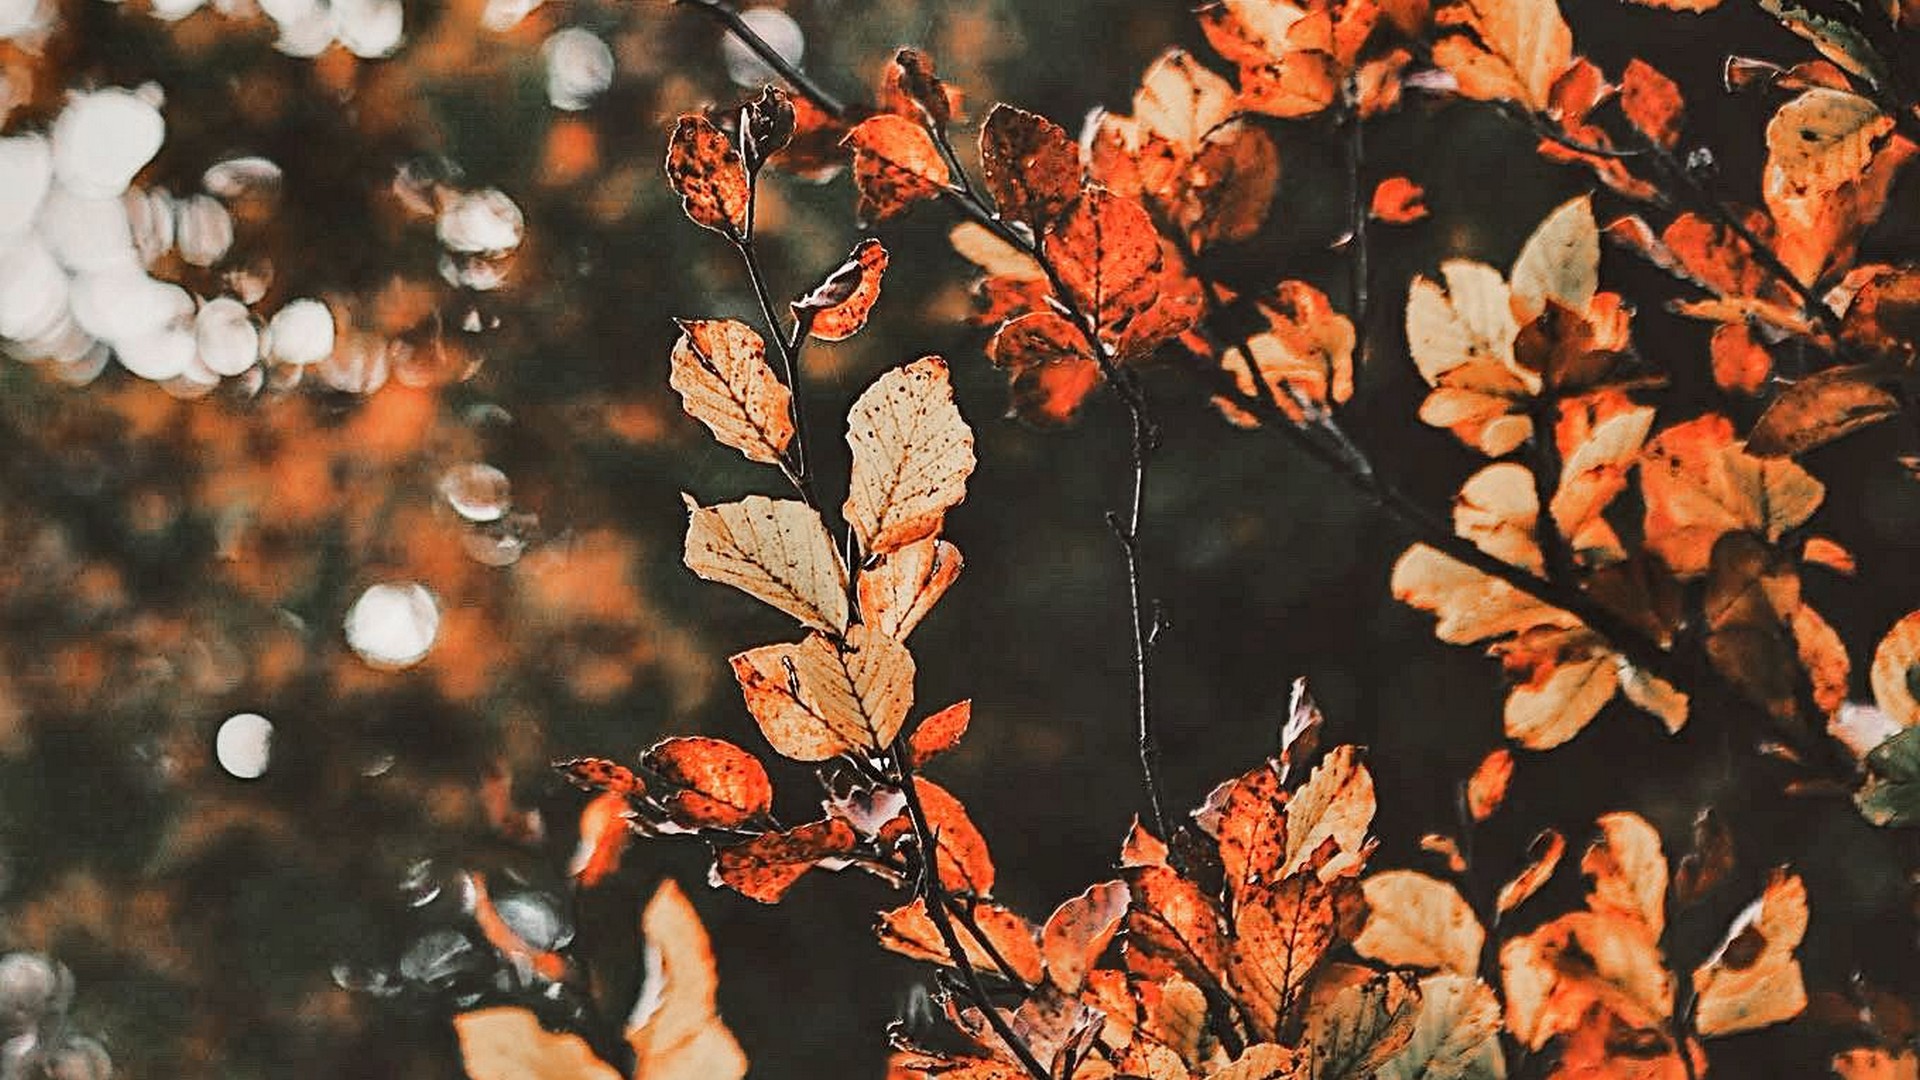 Wallpaper HD Fall Aesthetic With high-resolution 1920X1080 pixel. You can use this wallpaper for your Desktop Computer Backgrounds, Mac Wallpapers, Android Lock screen or iPhone Screensavers and another smartphone device